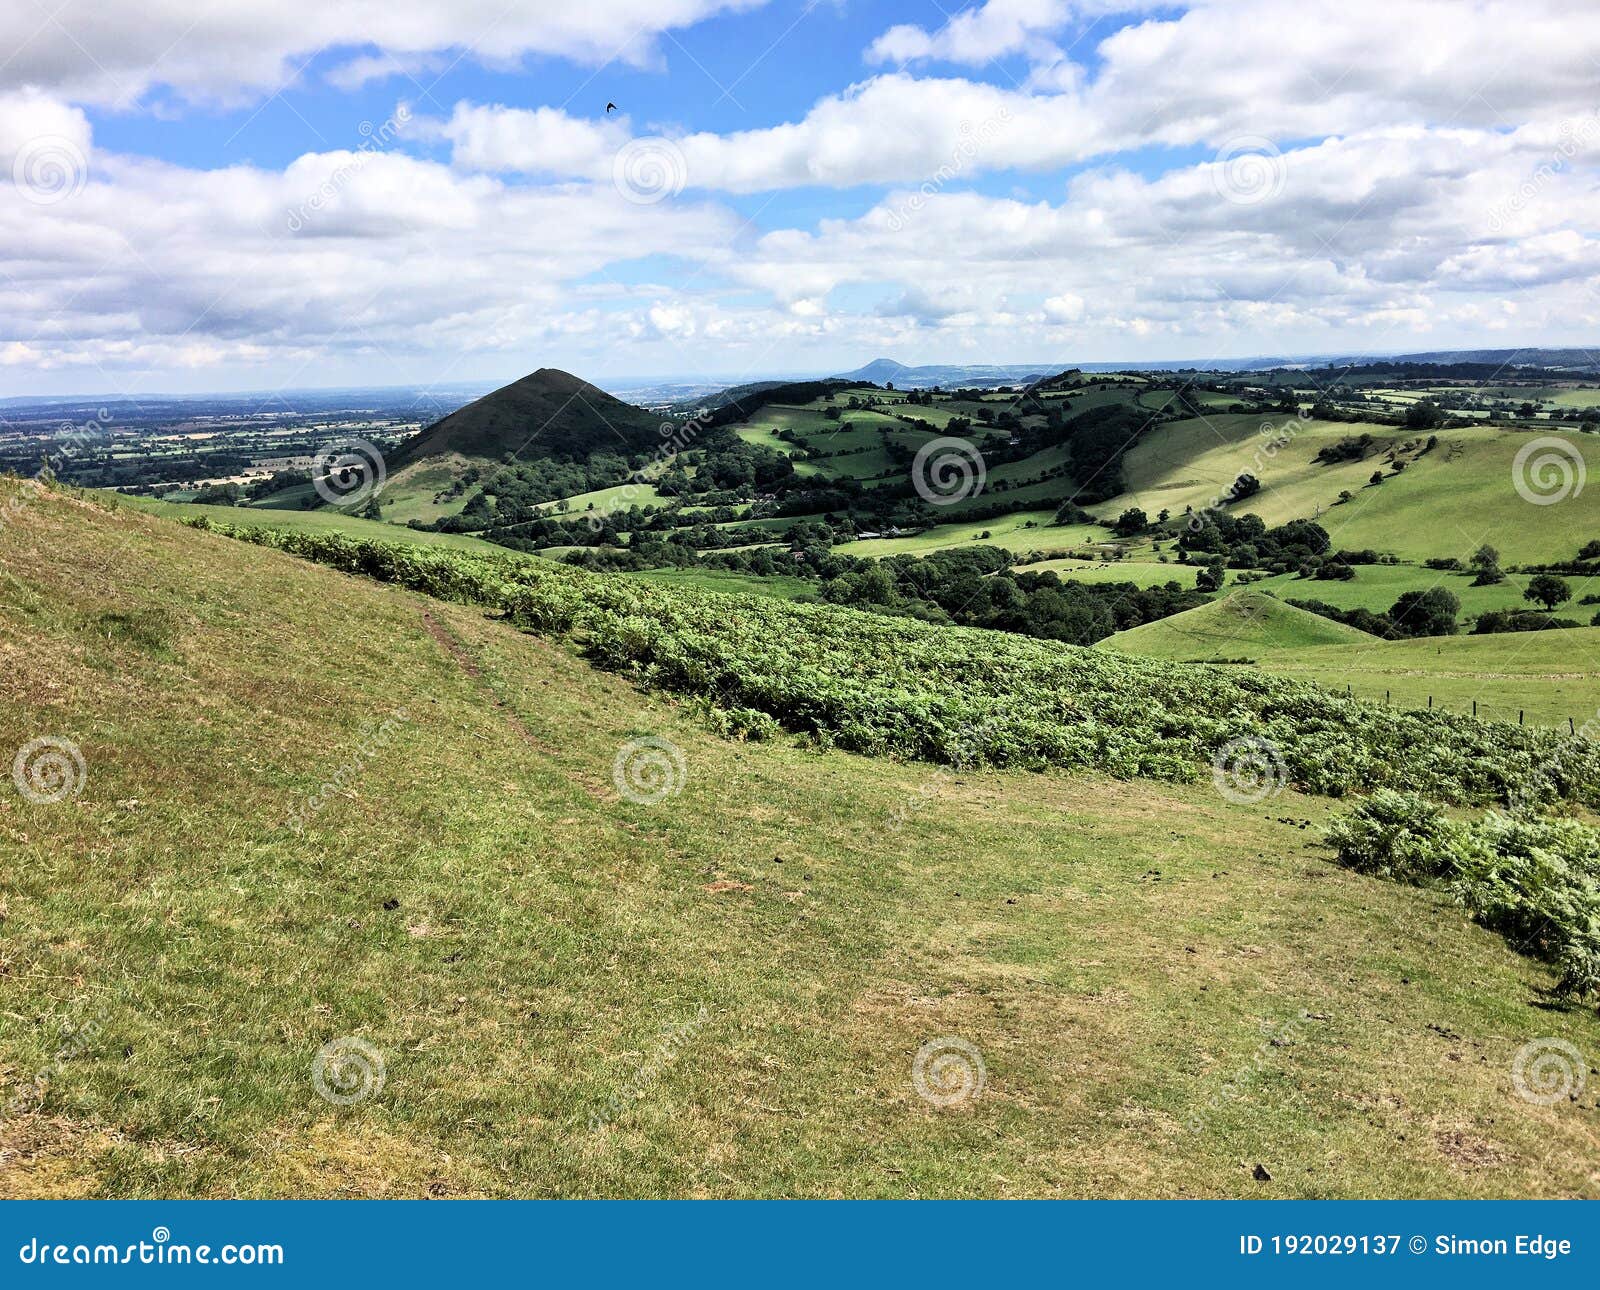 a view of the shopshire countryside near caer caradoc